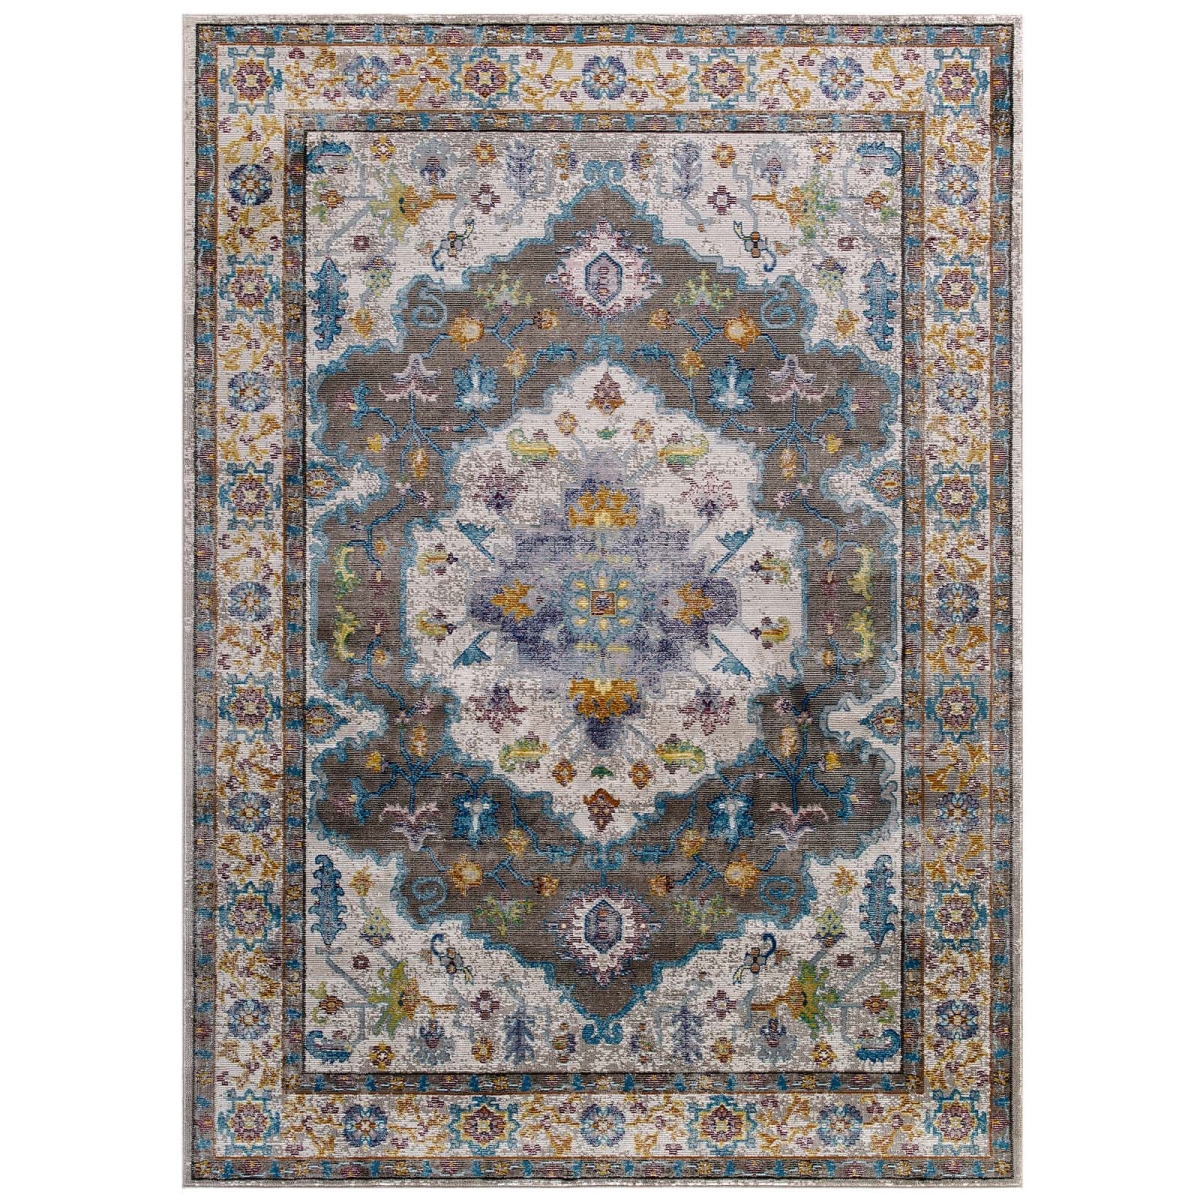 Get The 4 X 6 In Success Anisah, 4 X 8 Area Rug